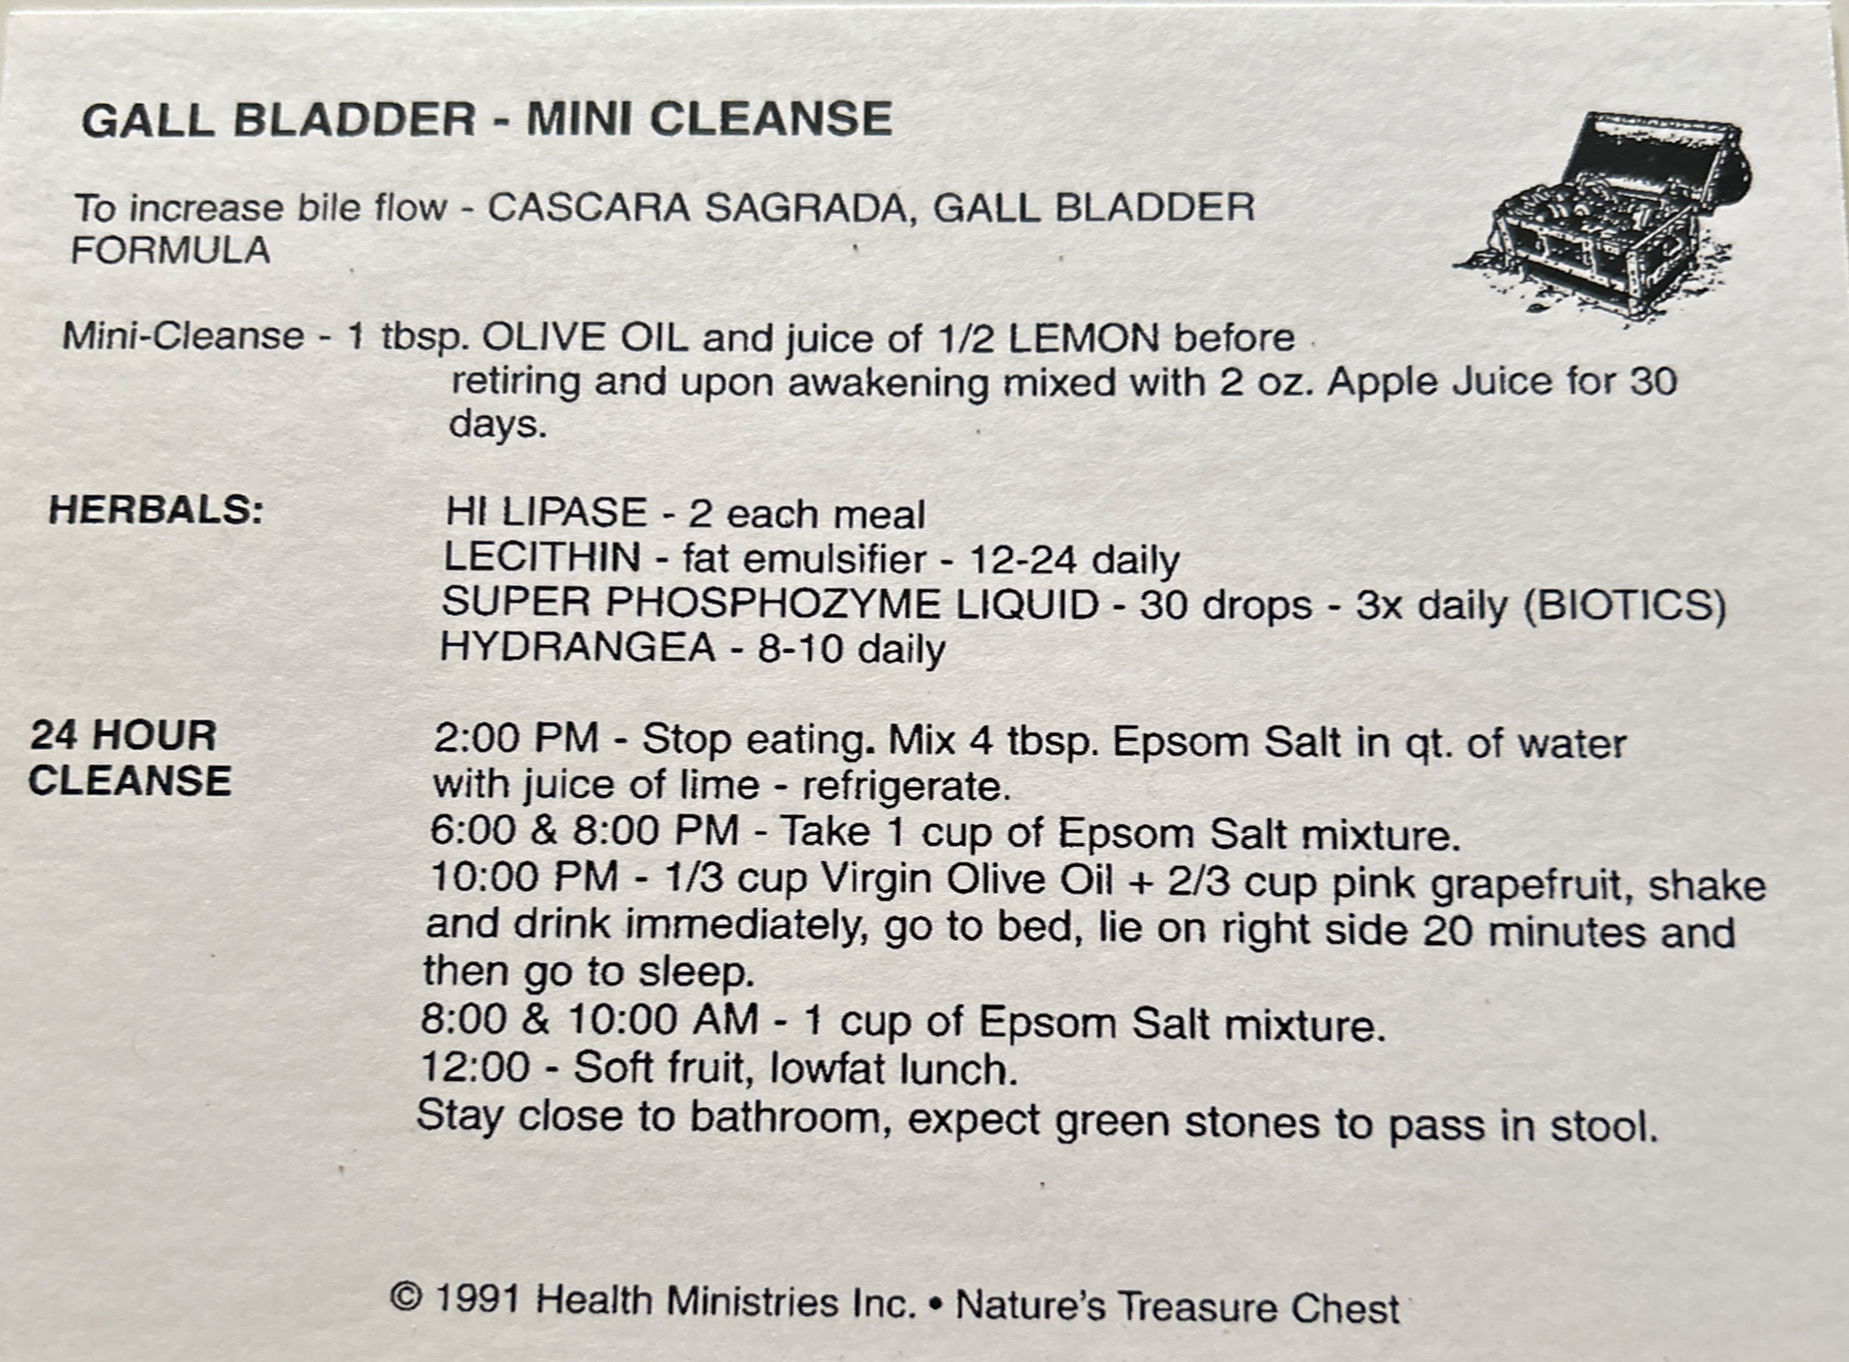 gallbladder cleanse information and instructions